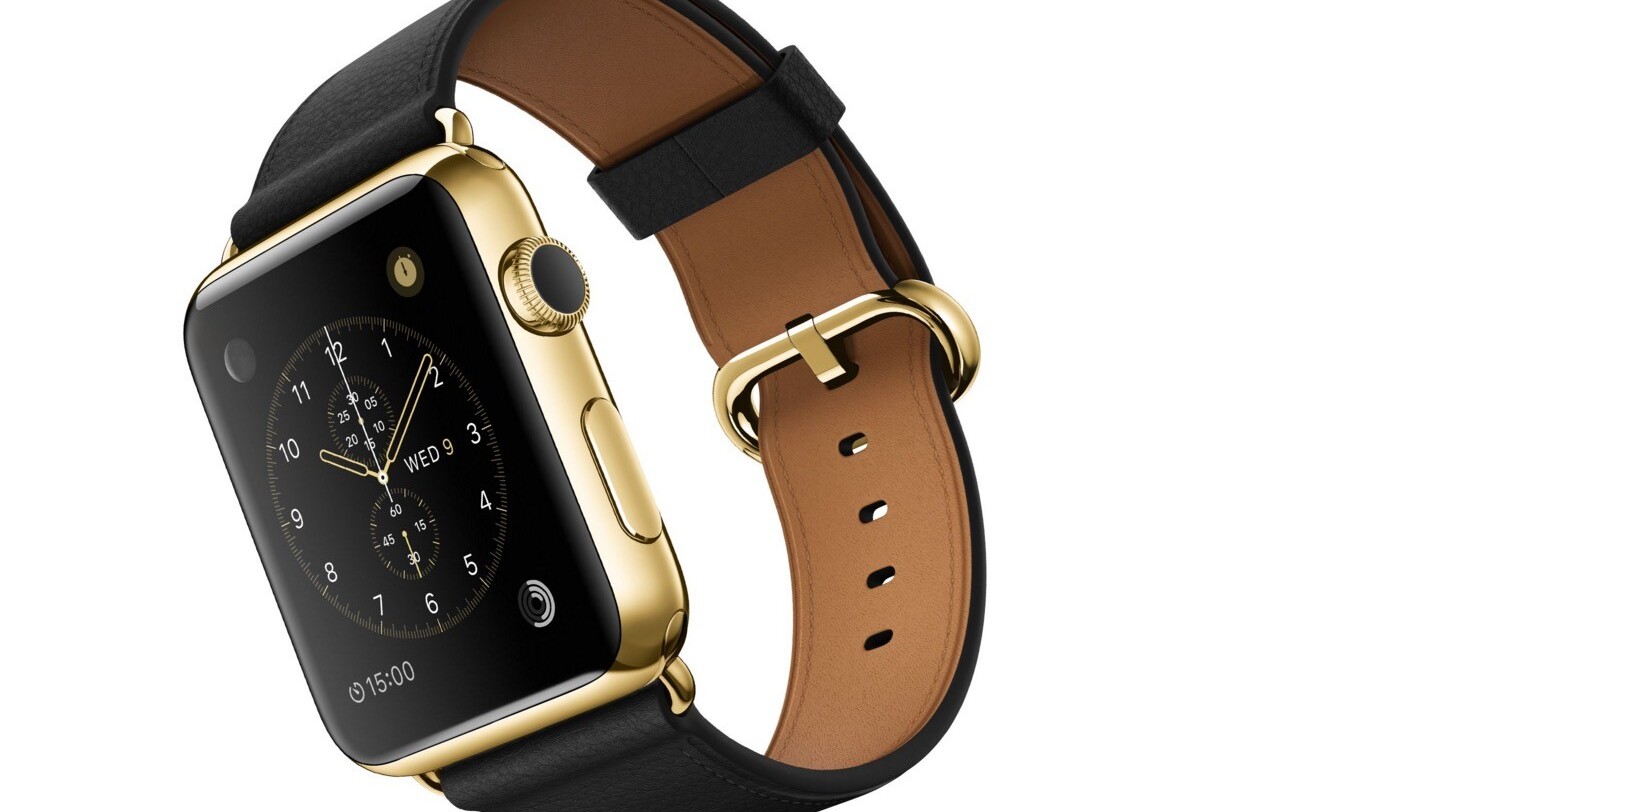 Best Buy just knocked $1,100 off an Apple Watch Edition